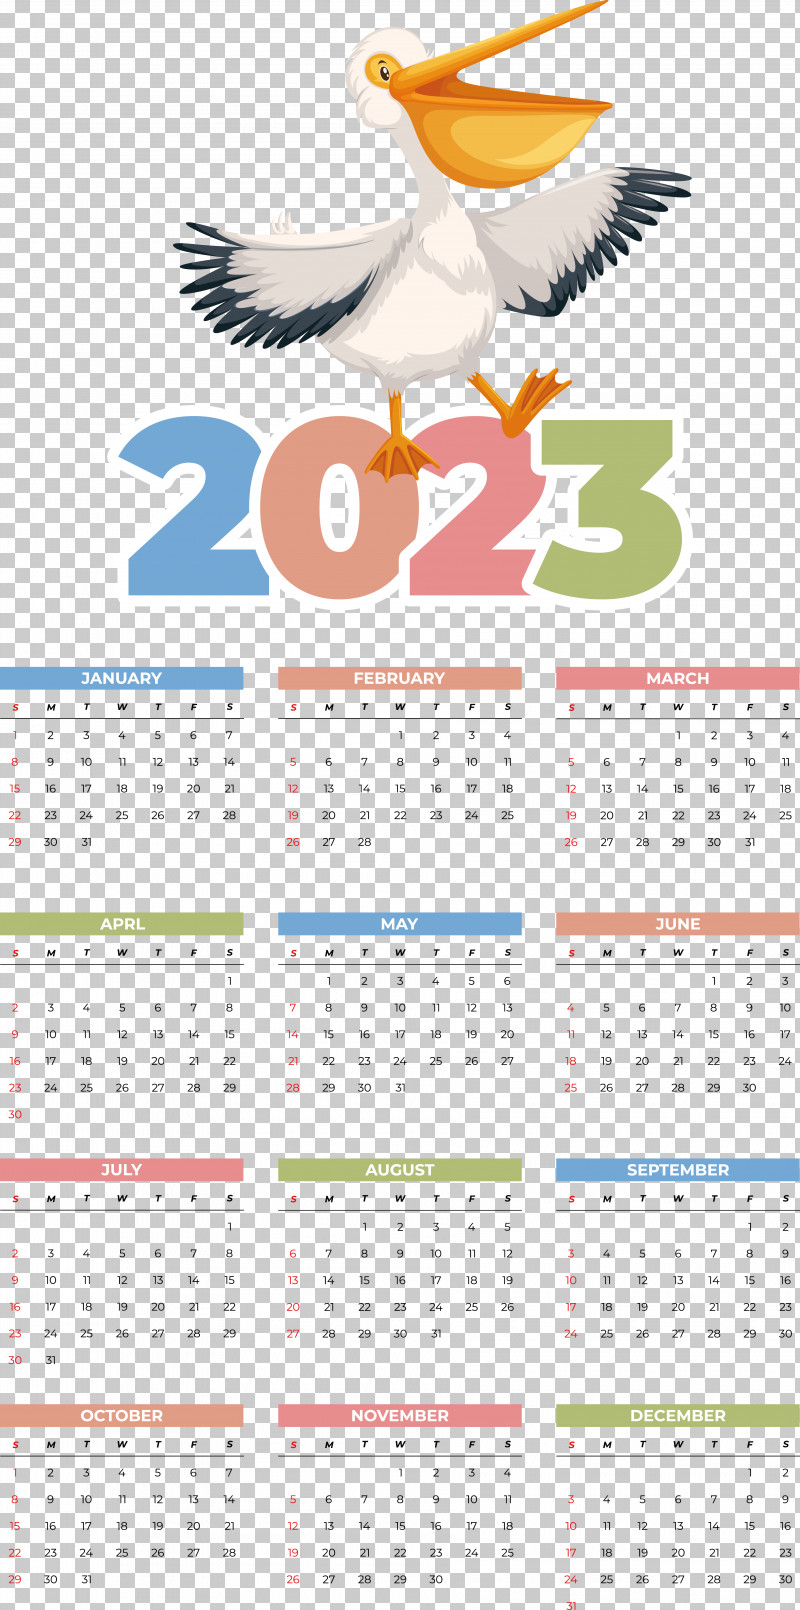 Calendar 2023 Vector 2022 PNG, Clipart, Calendar, Drawing, Free, March, May Free PNG Download